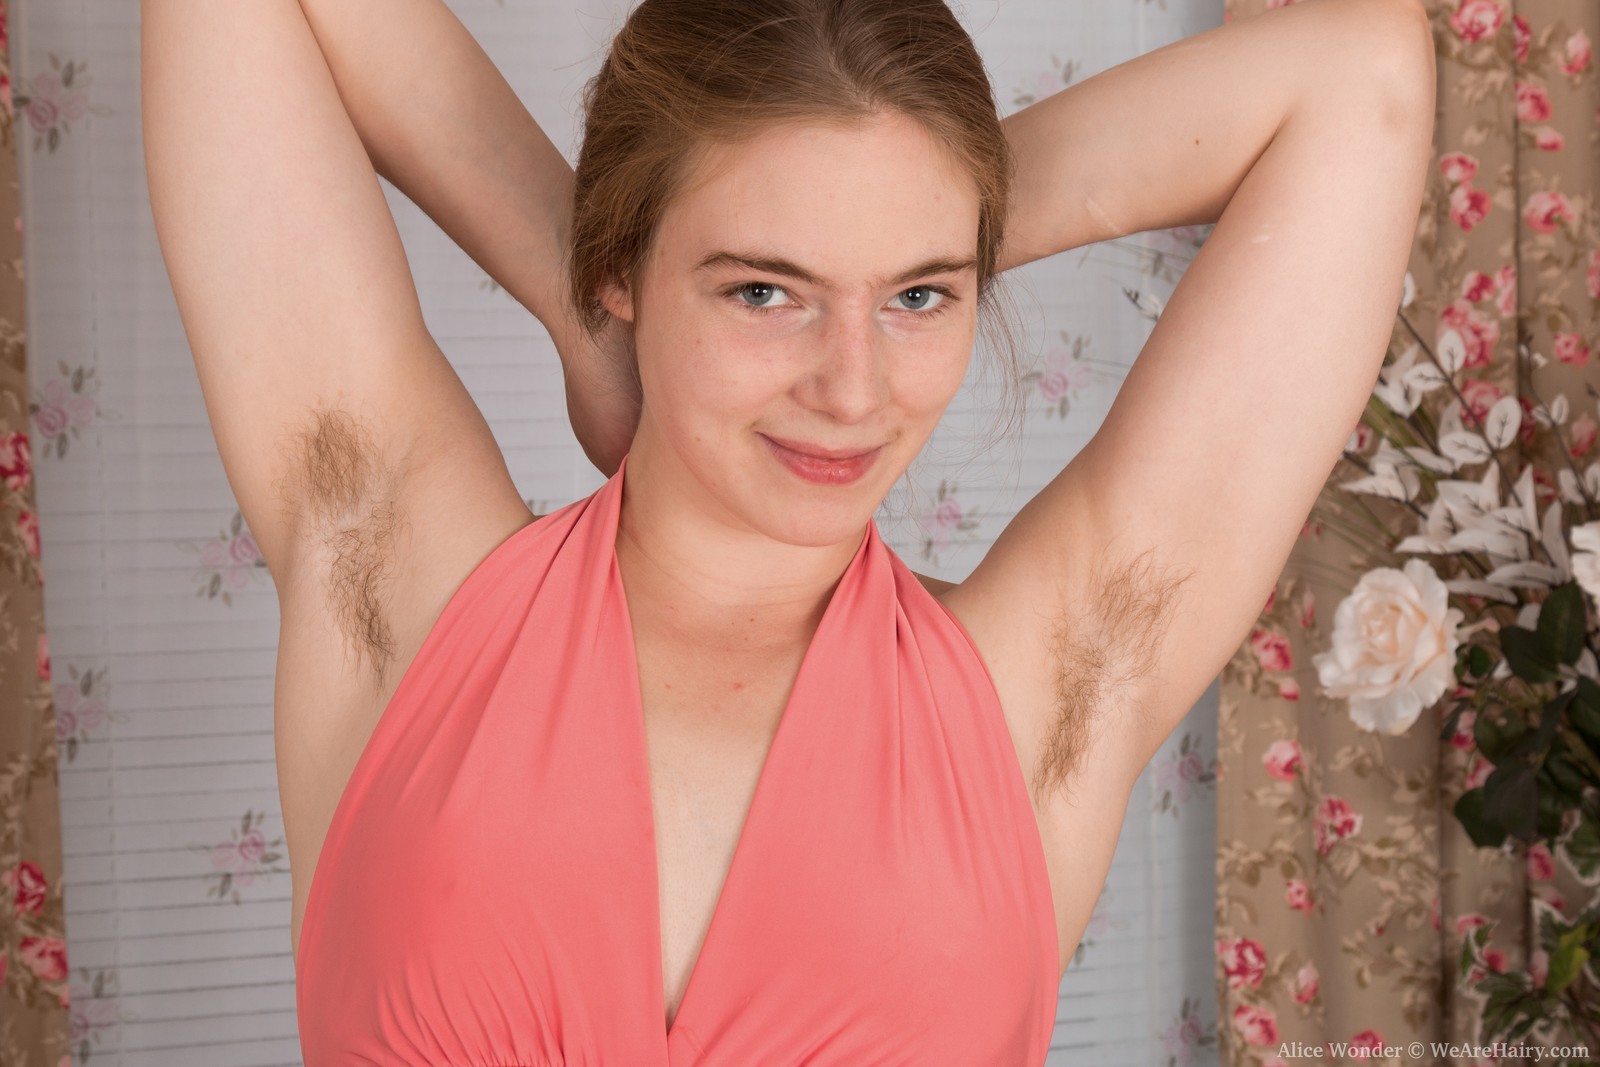 1600px x 1067px - Alice Wonder strips and shows off her hairy body